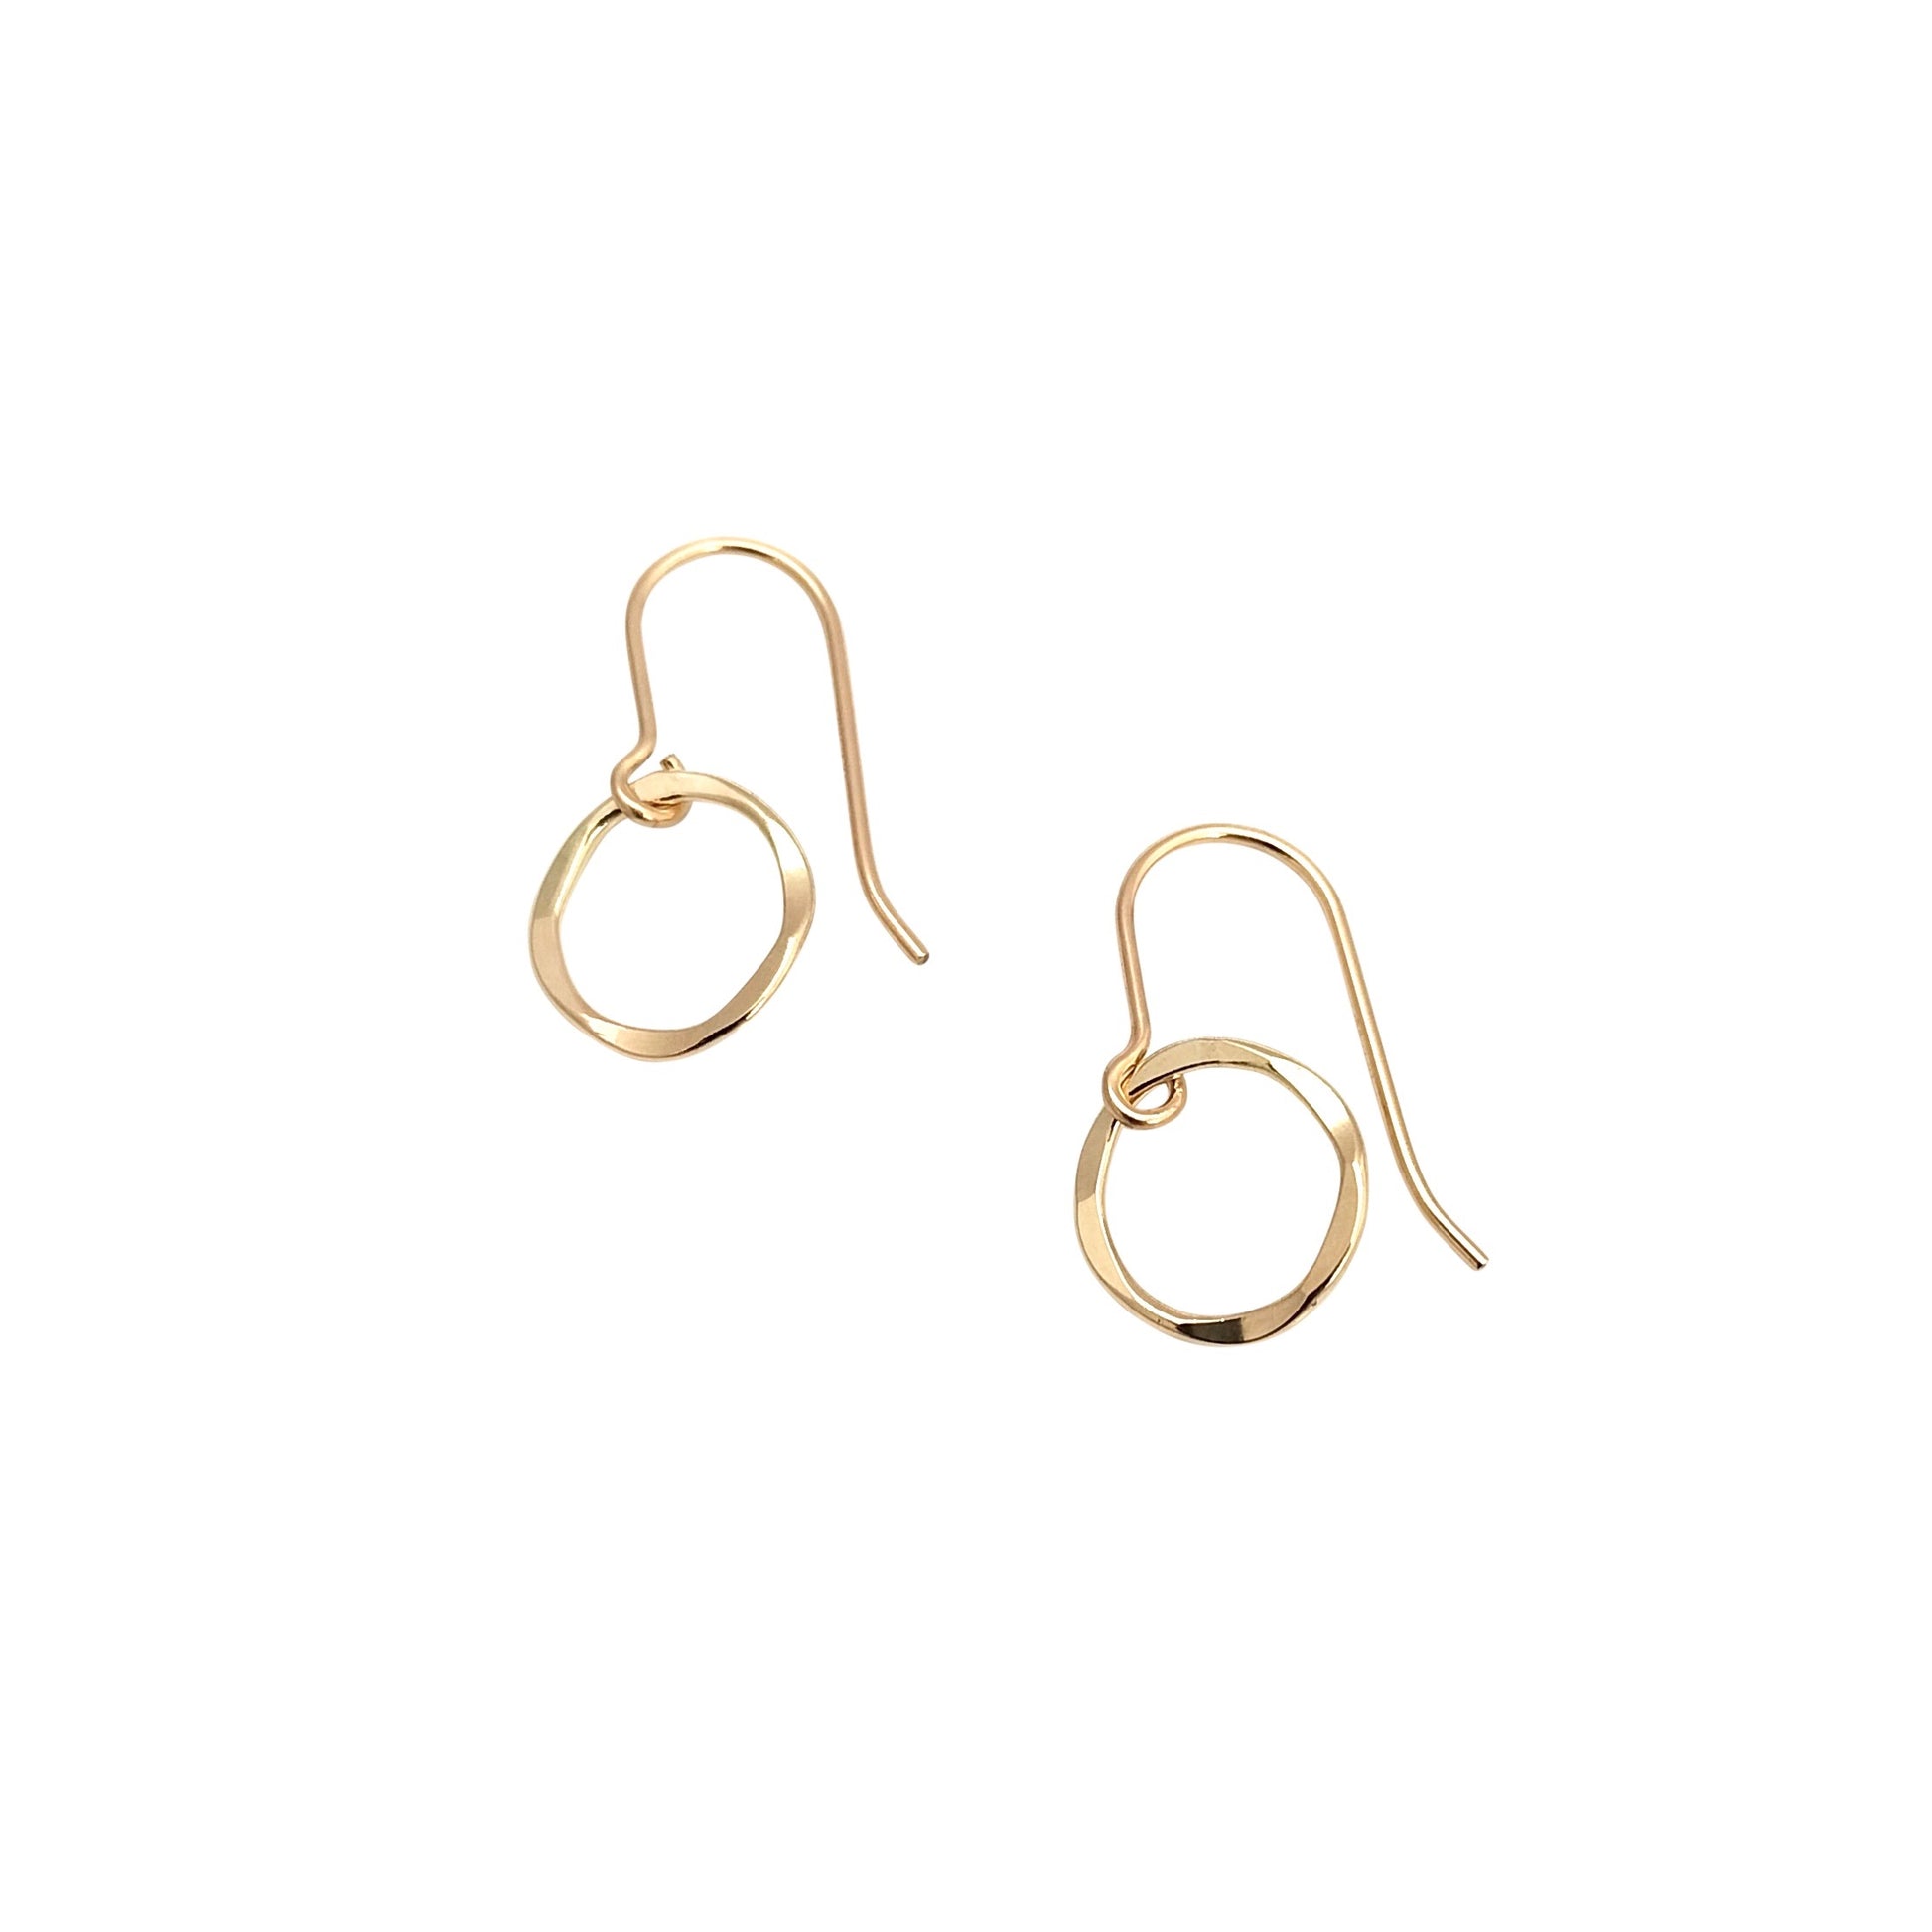 Textured gold circle earrings